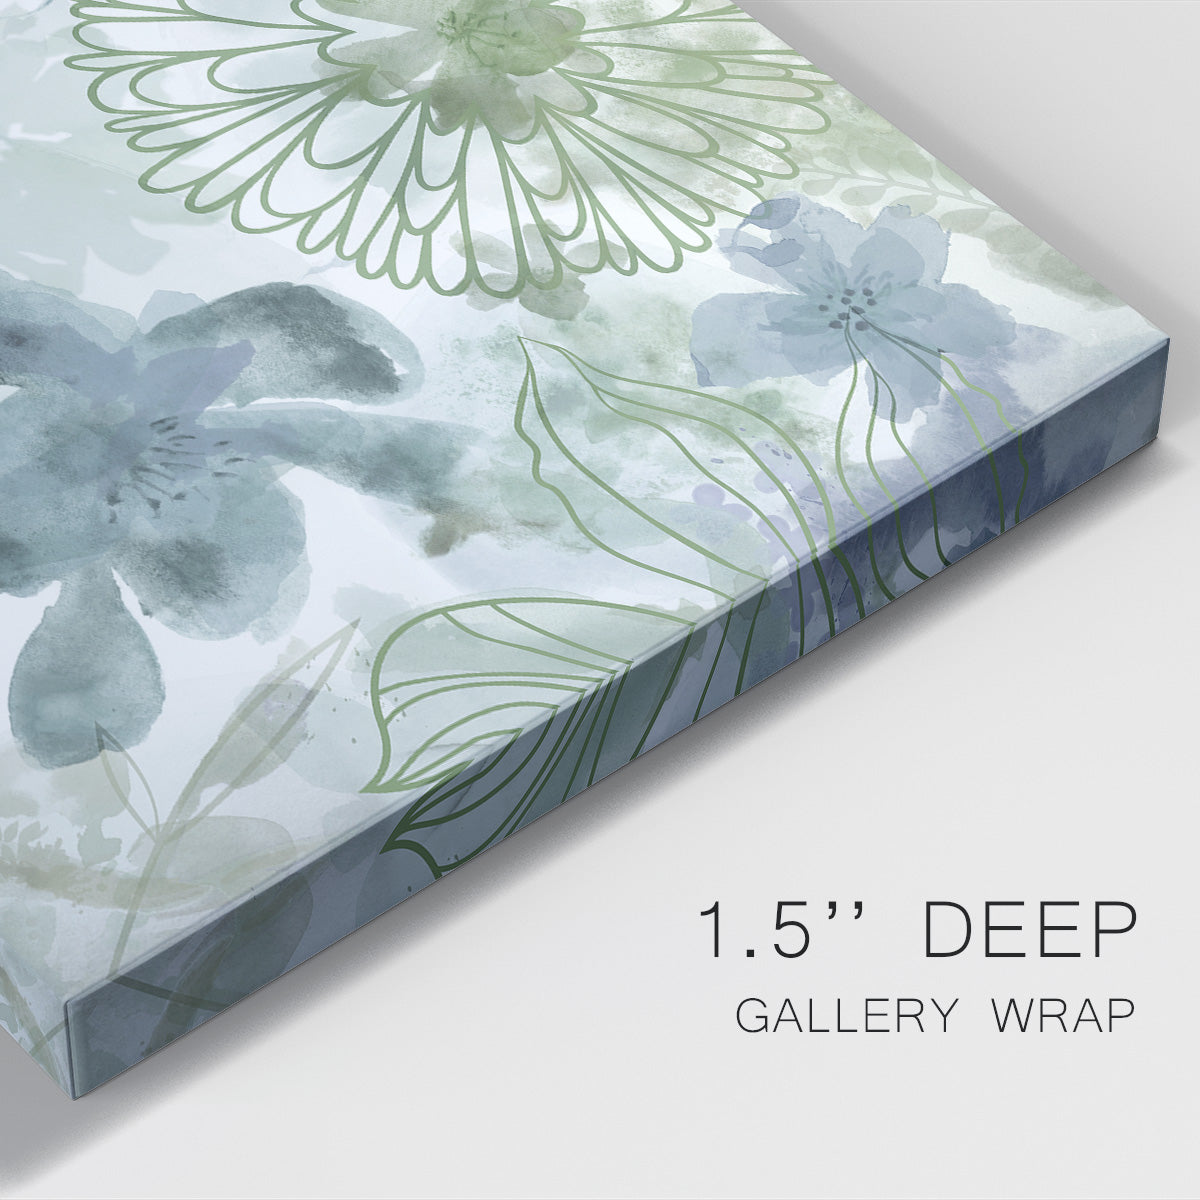 Bouquet of Dreams II Premium Gallery Wrapped Canvas - Ready to Hang